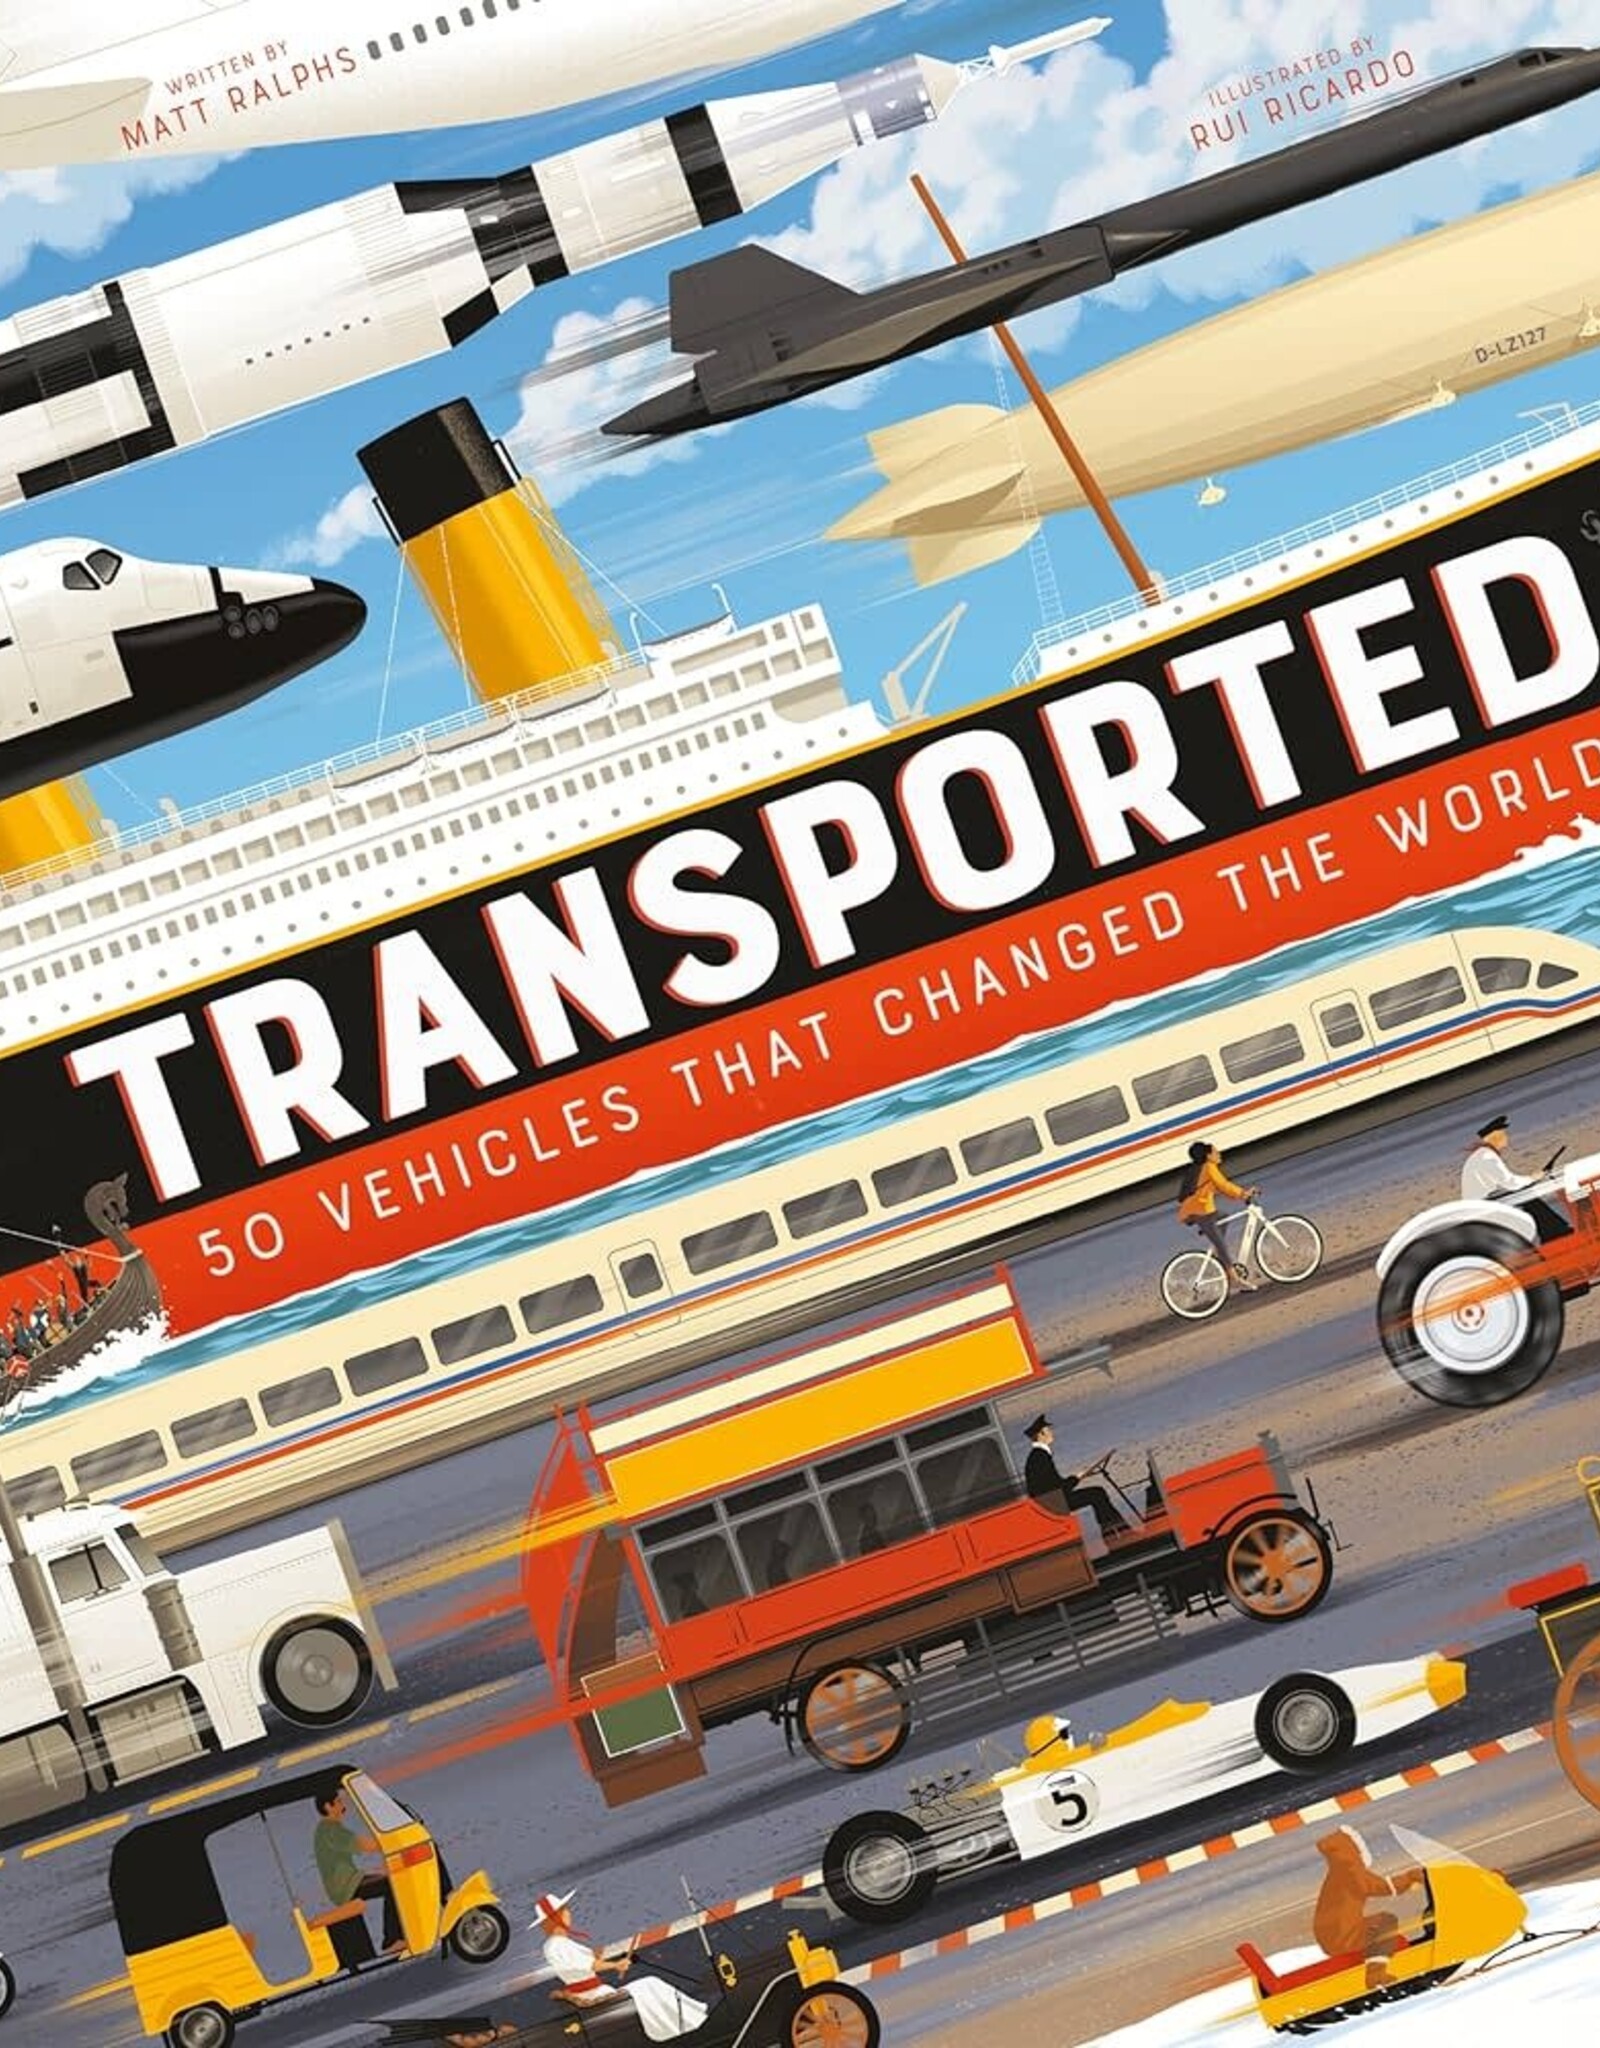 BOOK PUBLISHERS TRANSPORTED 50 VEHICLES THAT CHANGED THE WORLD